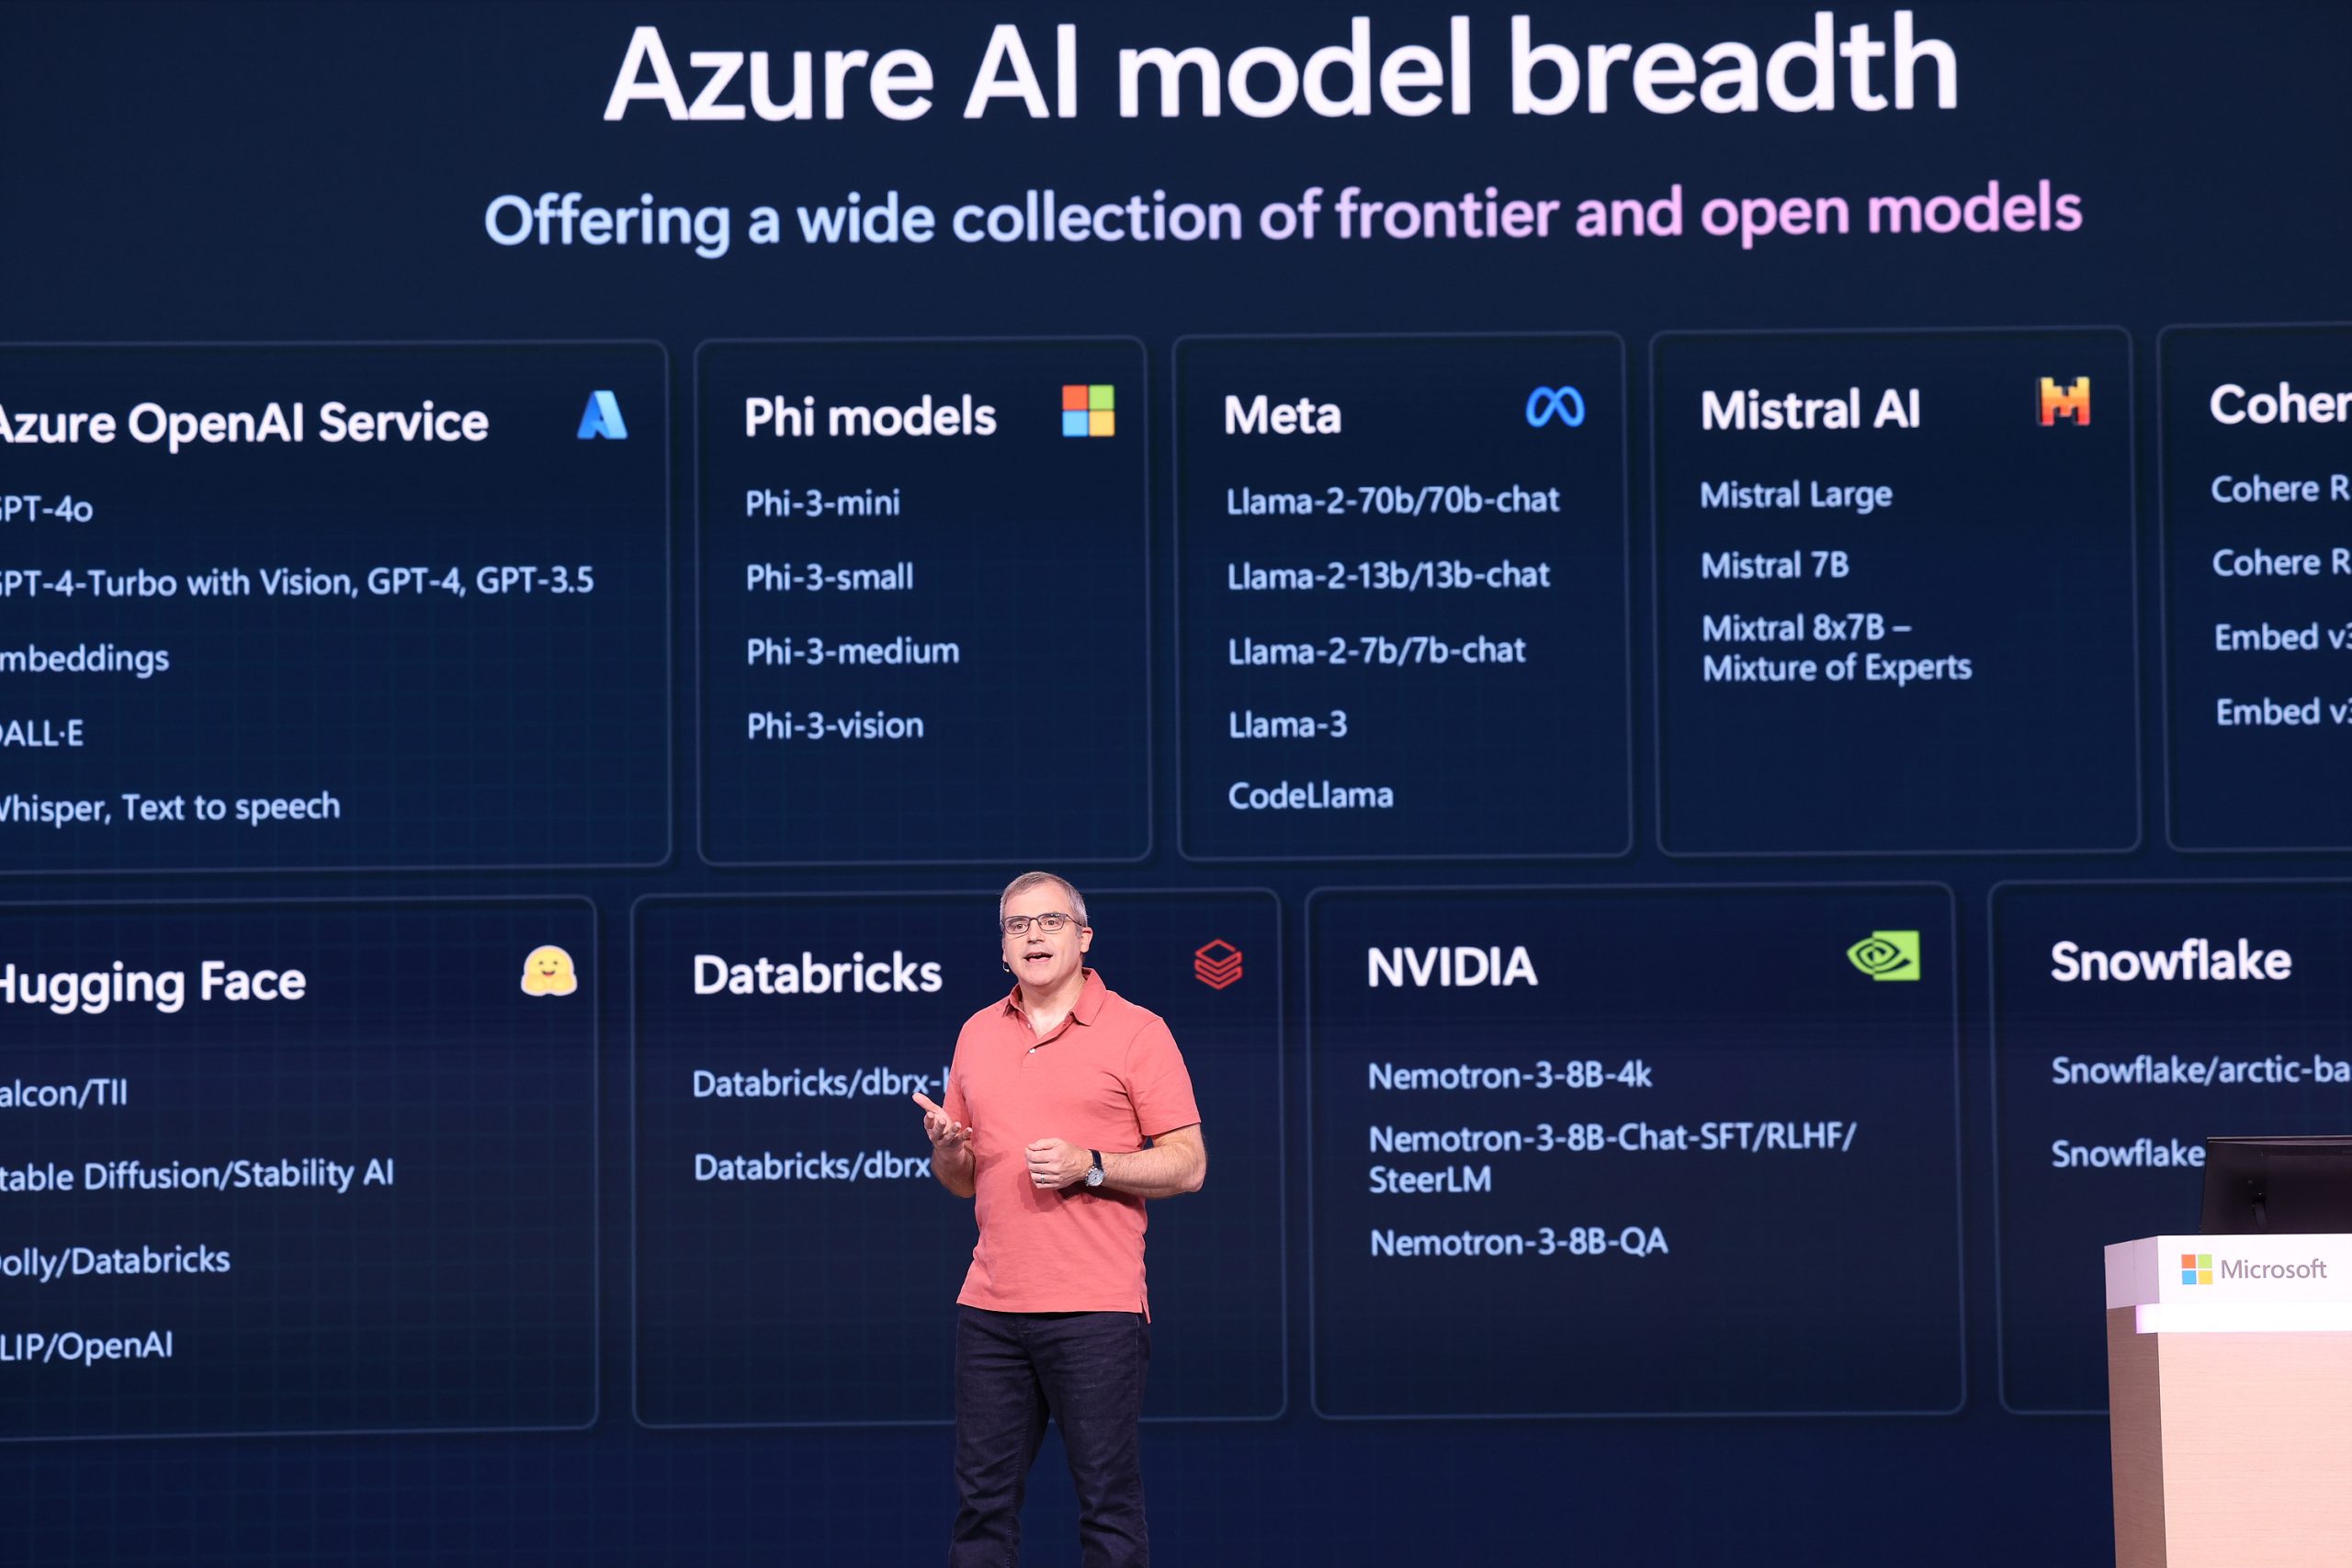 A man standing on stage speaking to an audience with text about Azure AI model breadth on a screen behind him